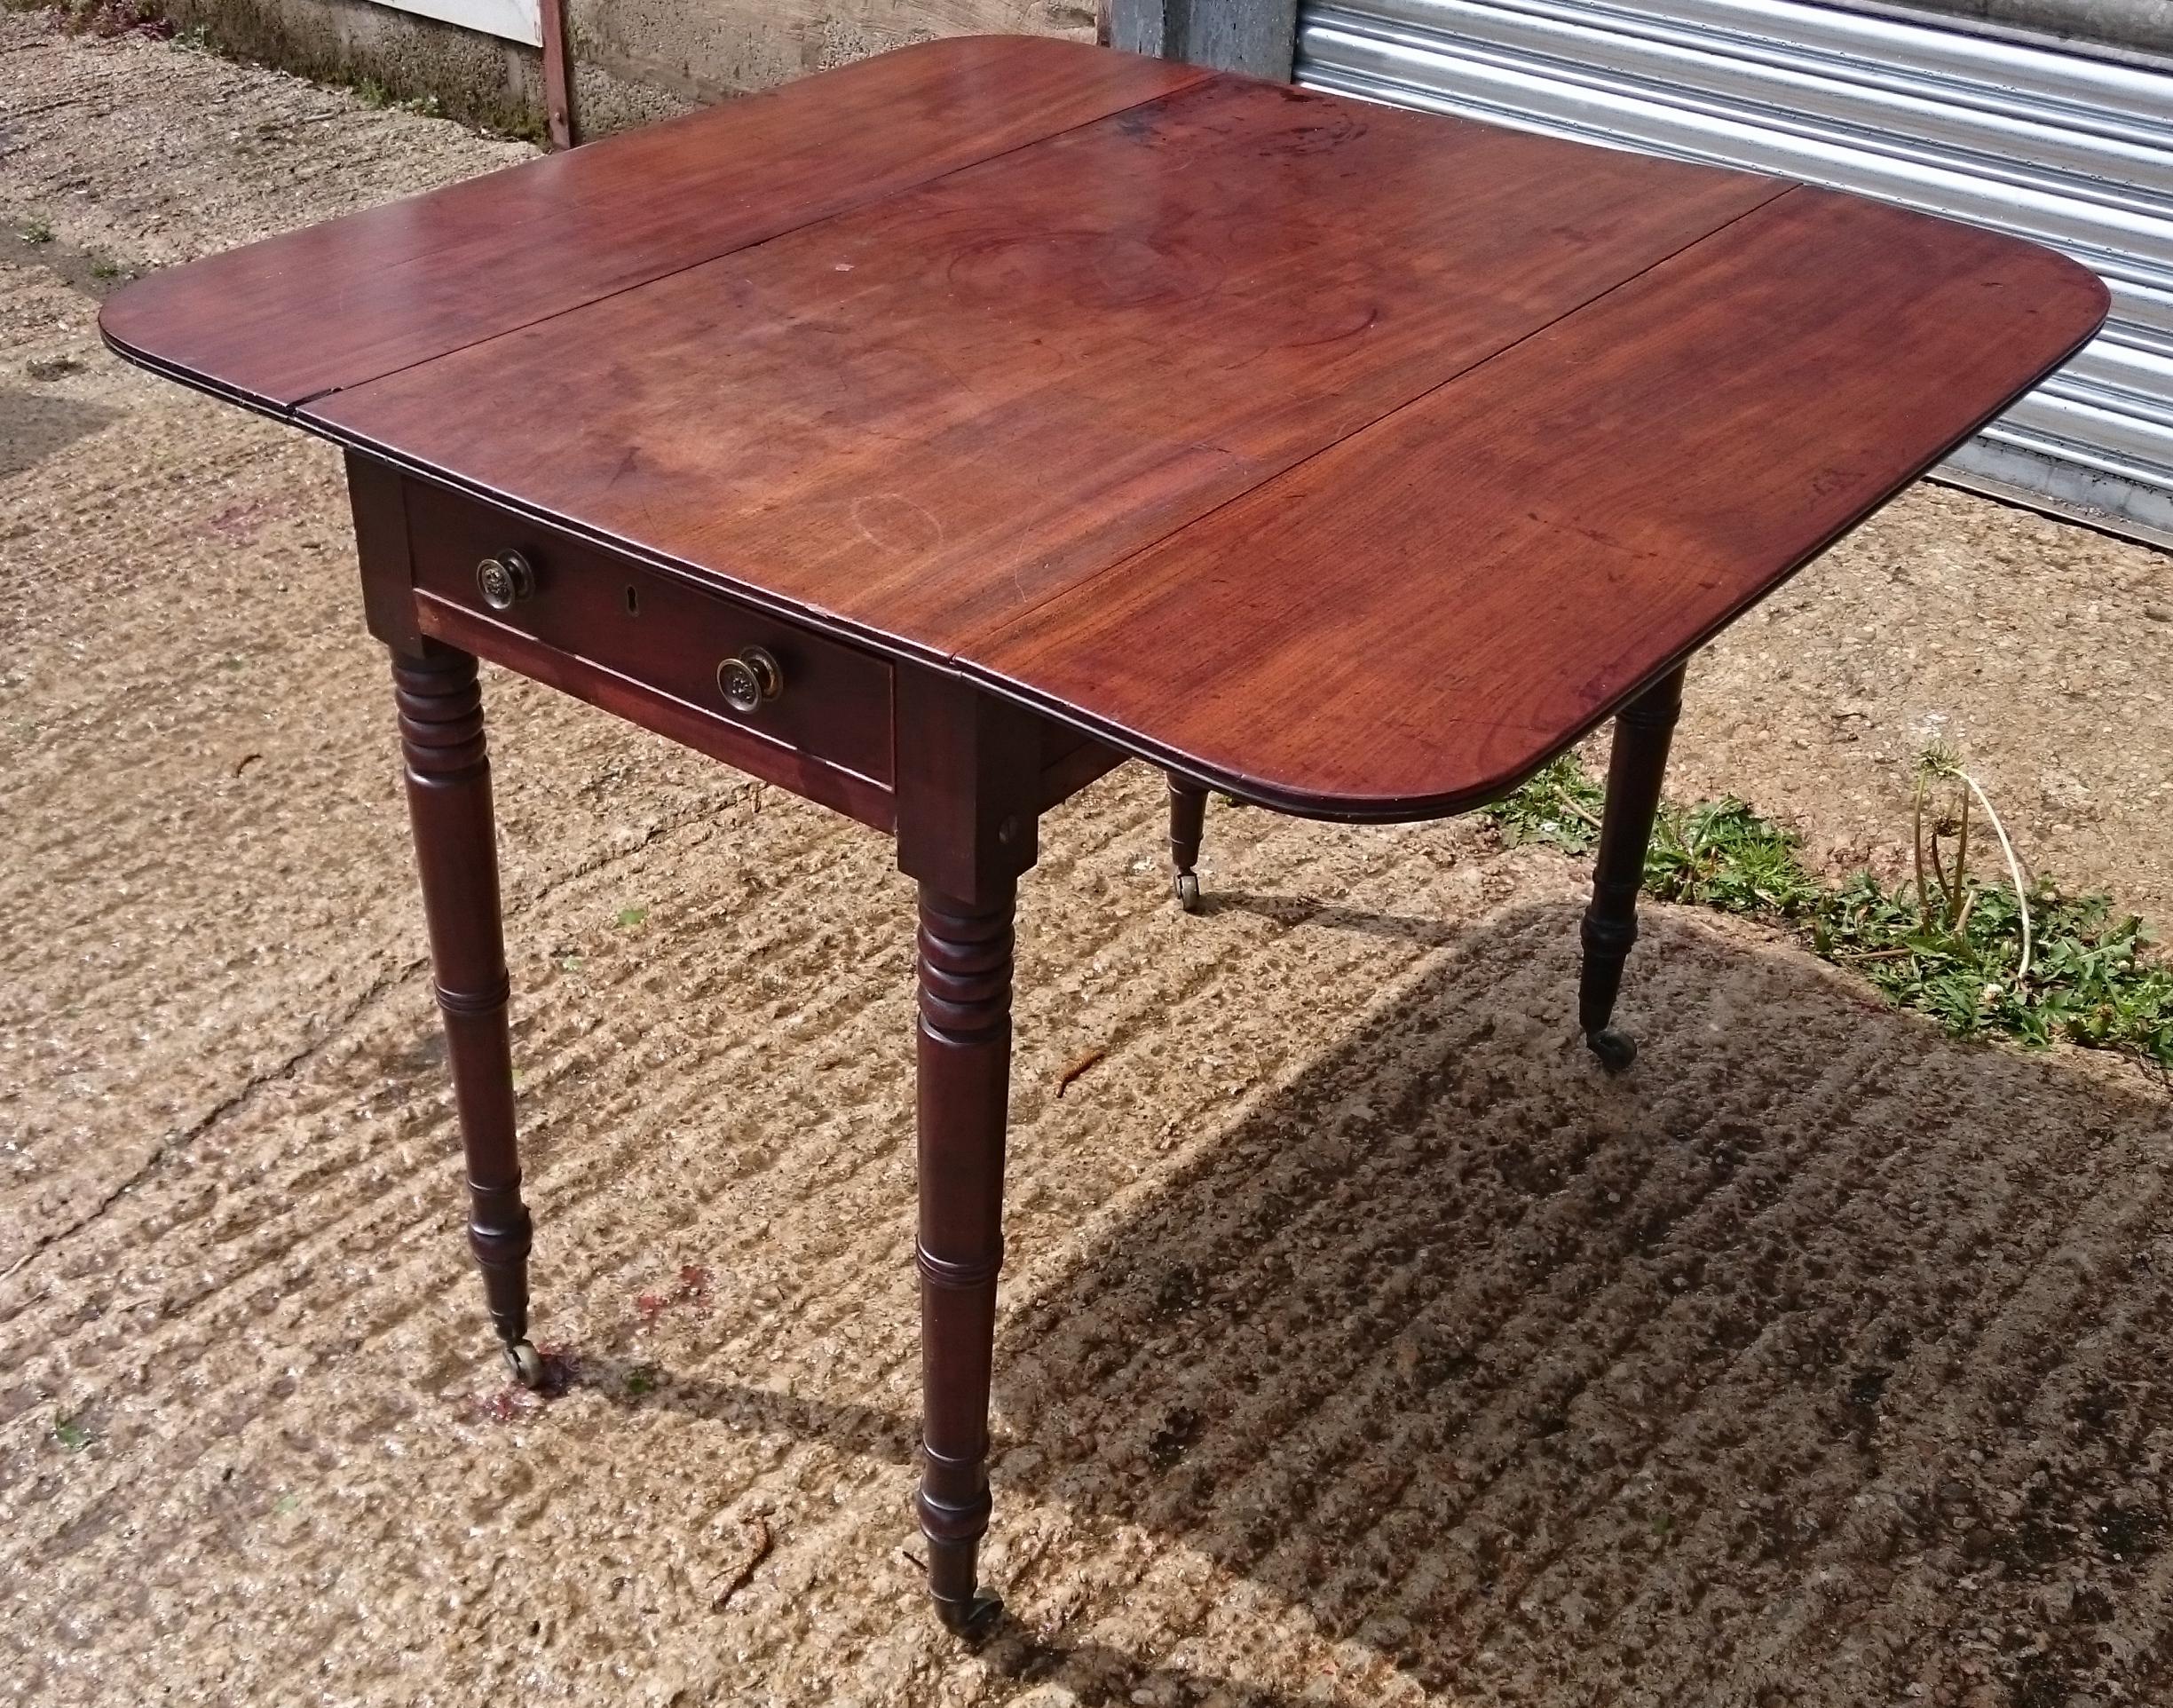 Charming little George III period mahogany antique Pembroke table. This table is very nicely made, with reeding around the edge of the top, elegant turned legs, thin frieze, double loper supports, one real and one dummy drawer, mahogany drawer